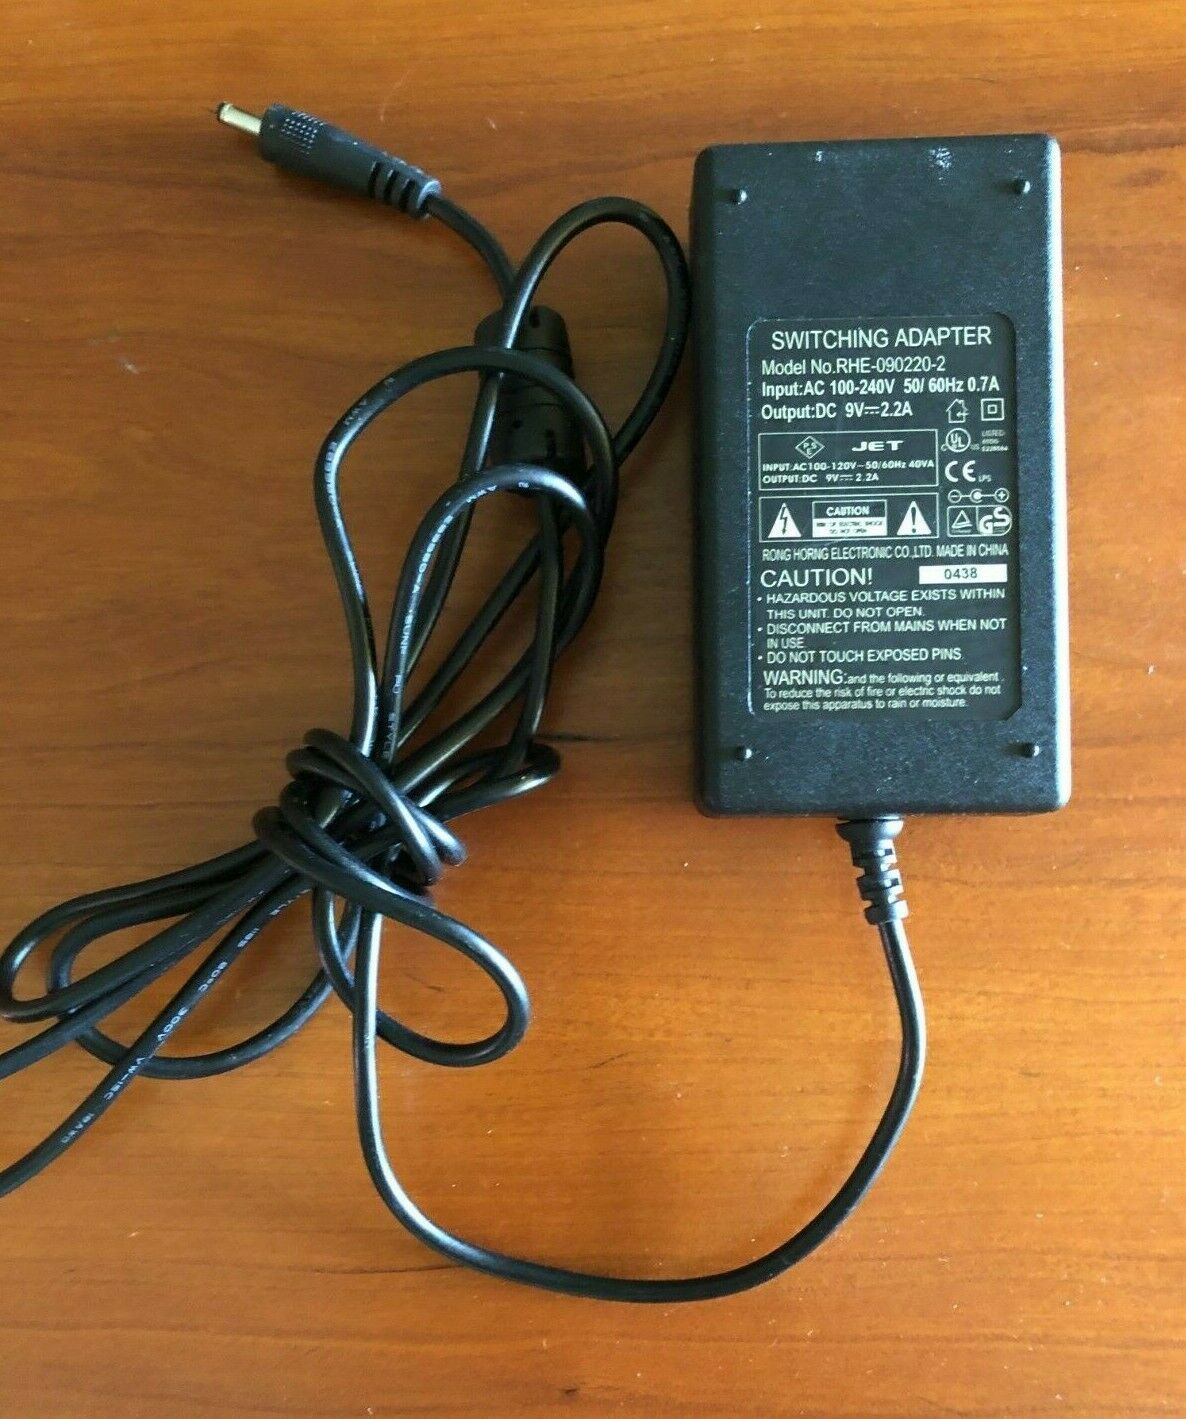 JET RHE-090220-2 Switching Power Supply Adapter 9V 2.2A Custom Bundle: No Output Voltage: 9V Type: Adapter Brand: JET - Click Image to Close